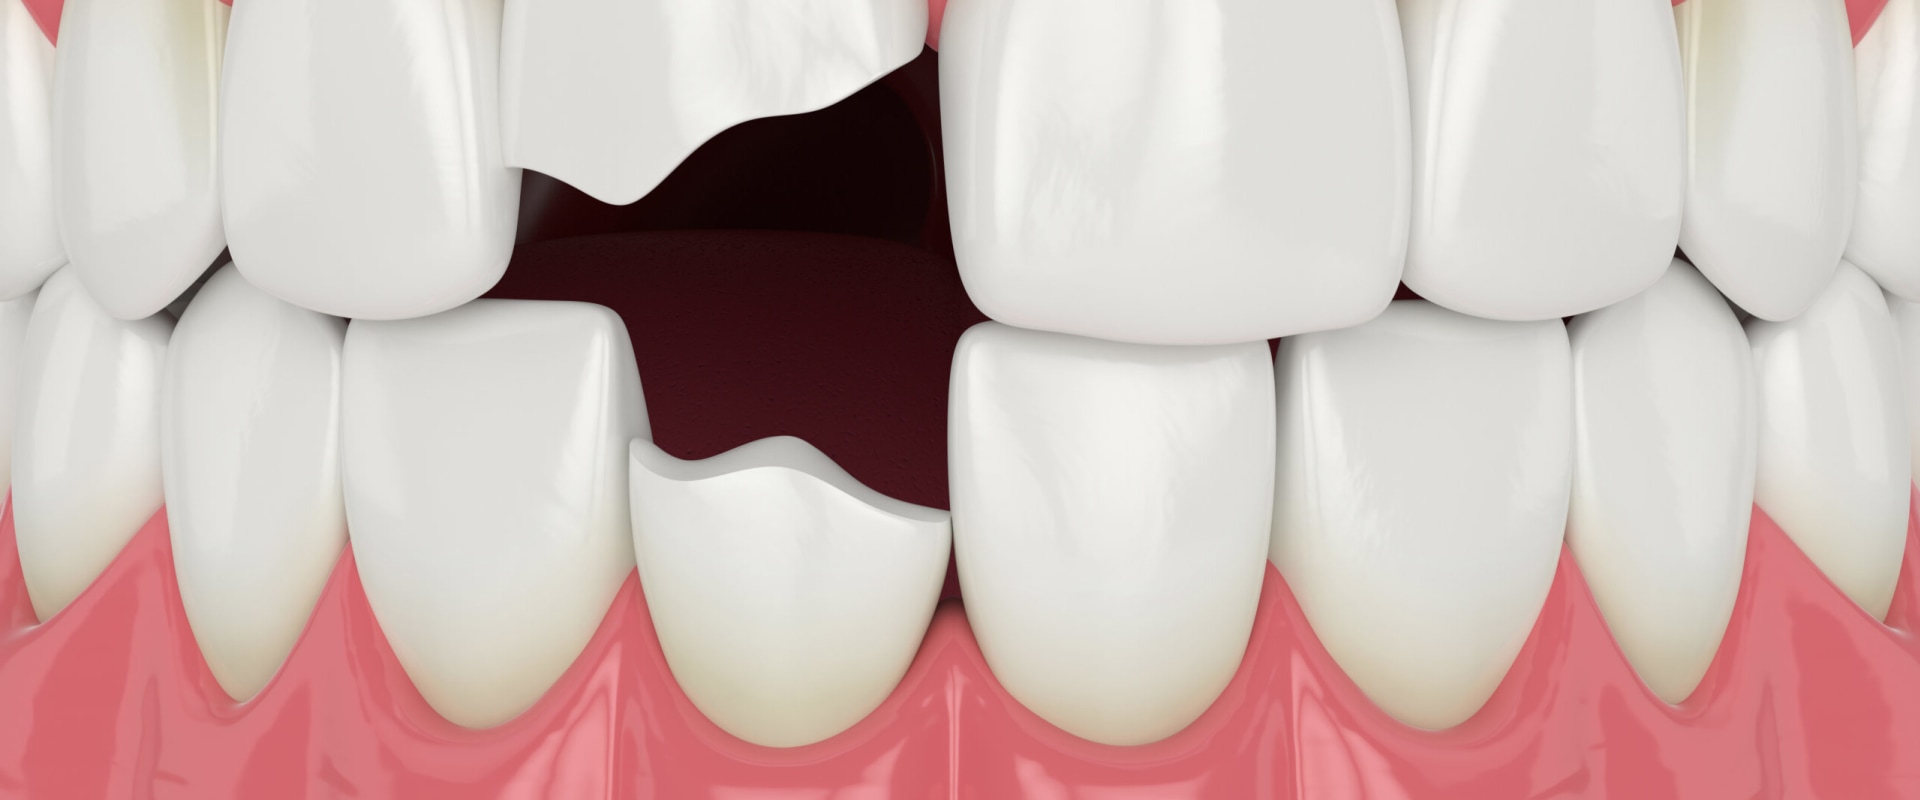 Broken Tooth Repair: Everything You Need to Know